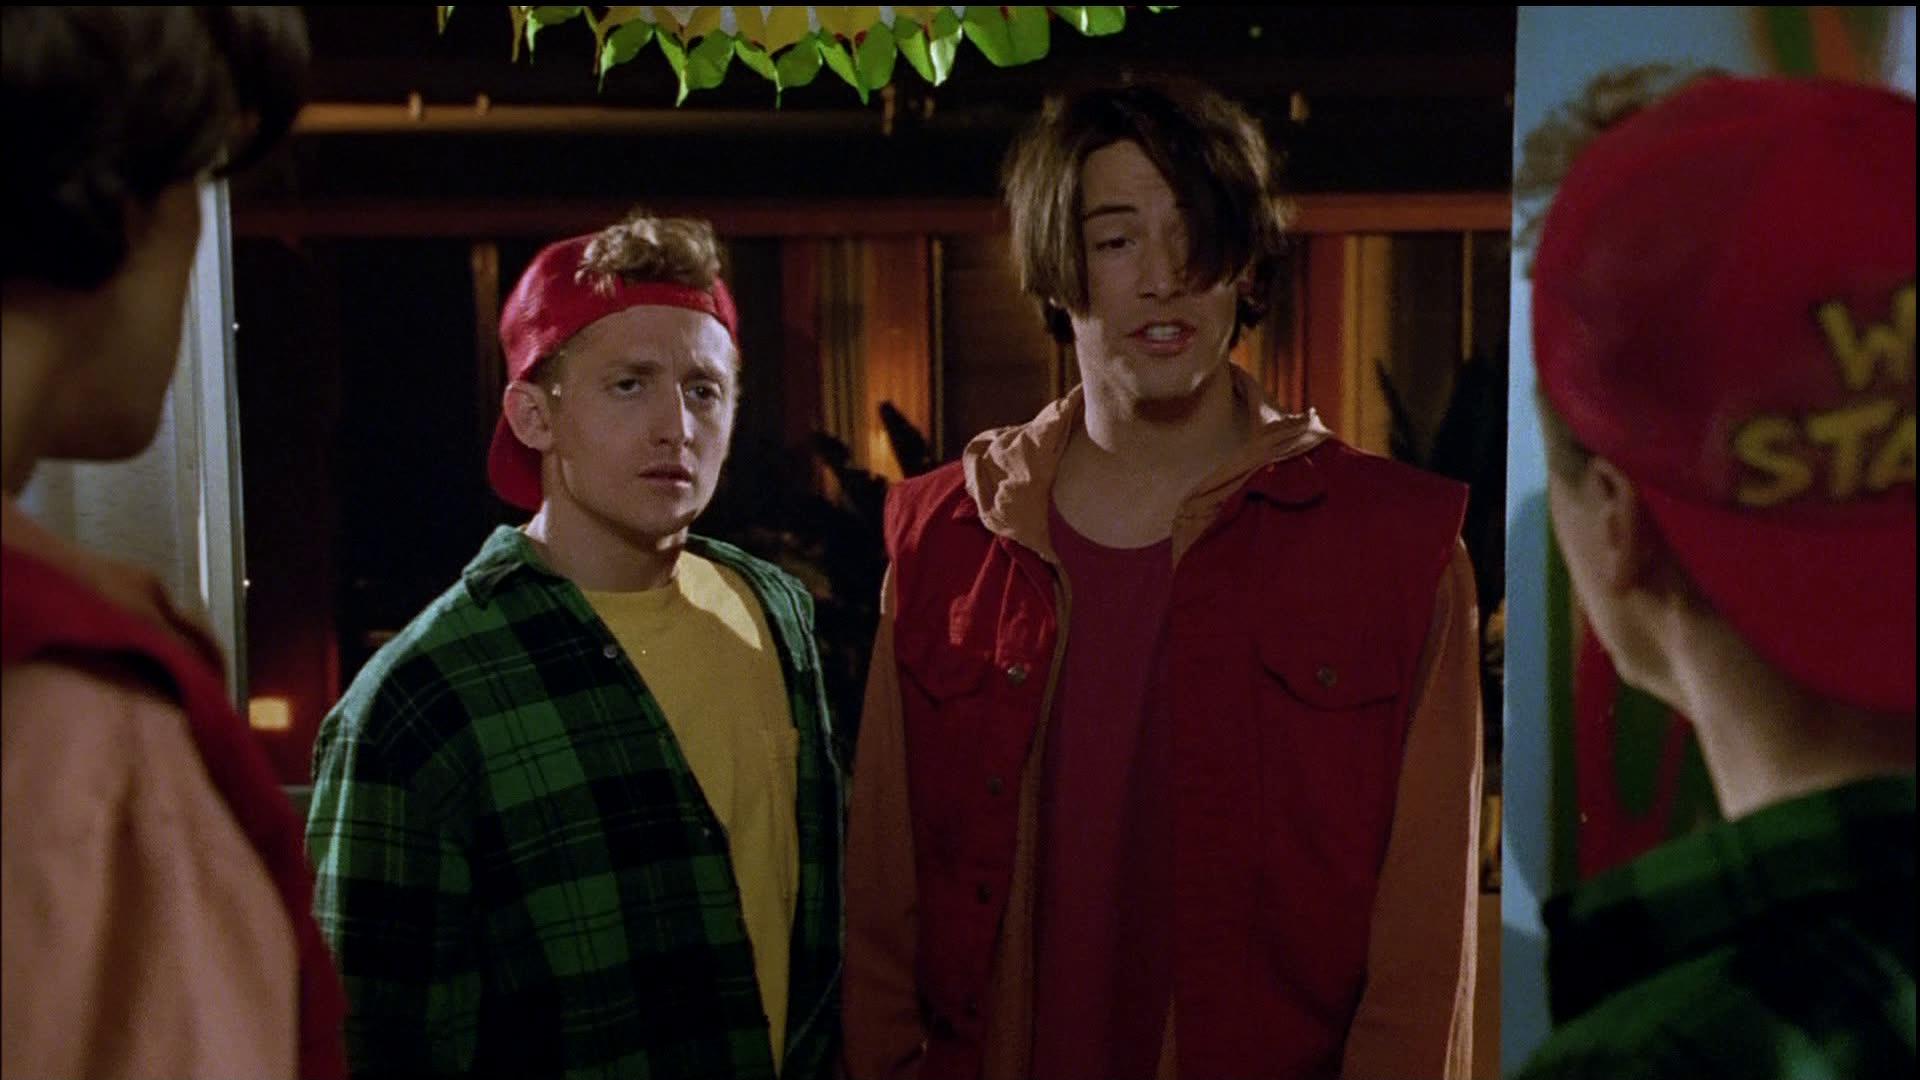 Bill and Ted face the music film has been announced